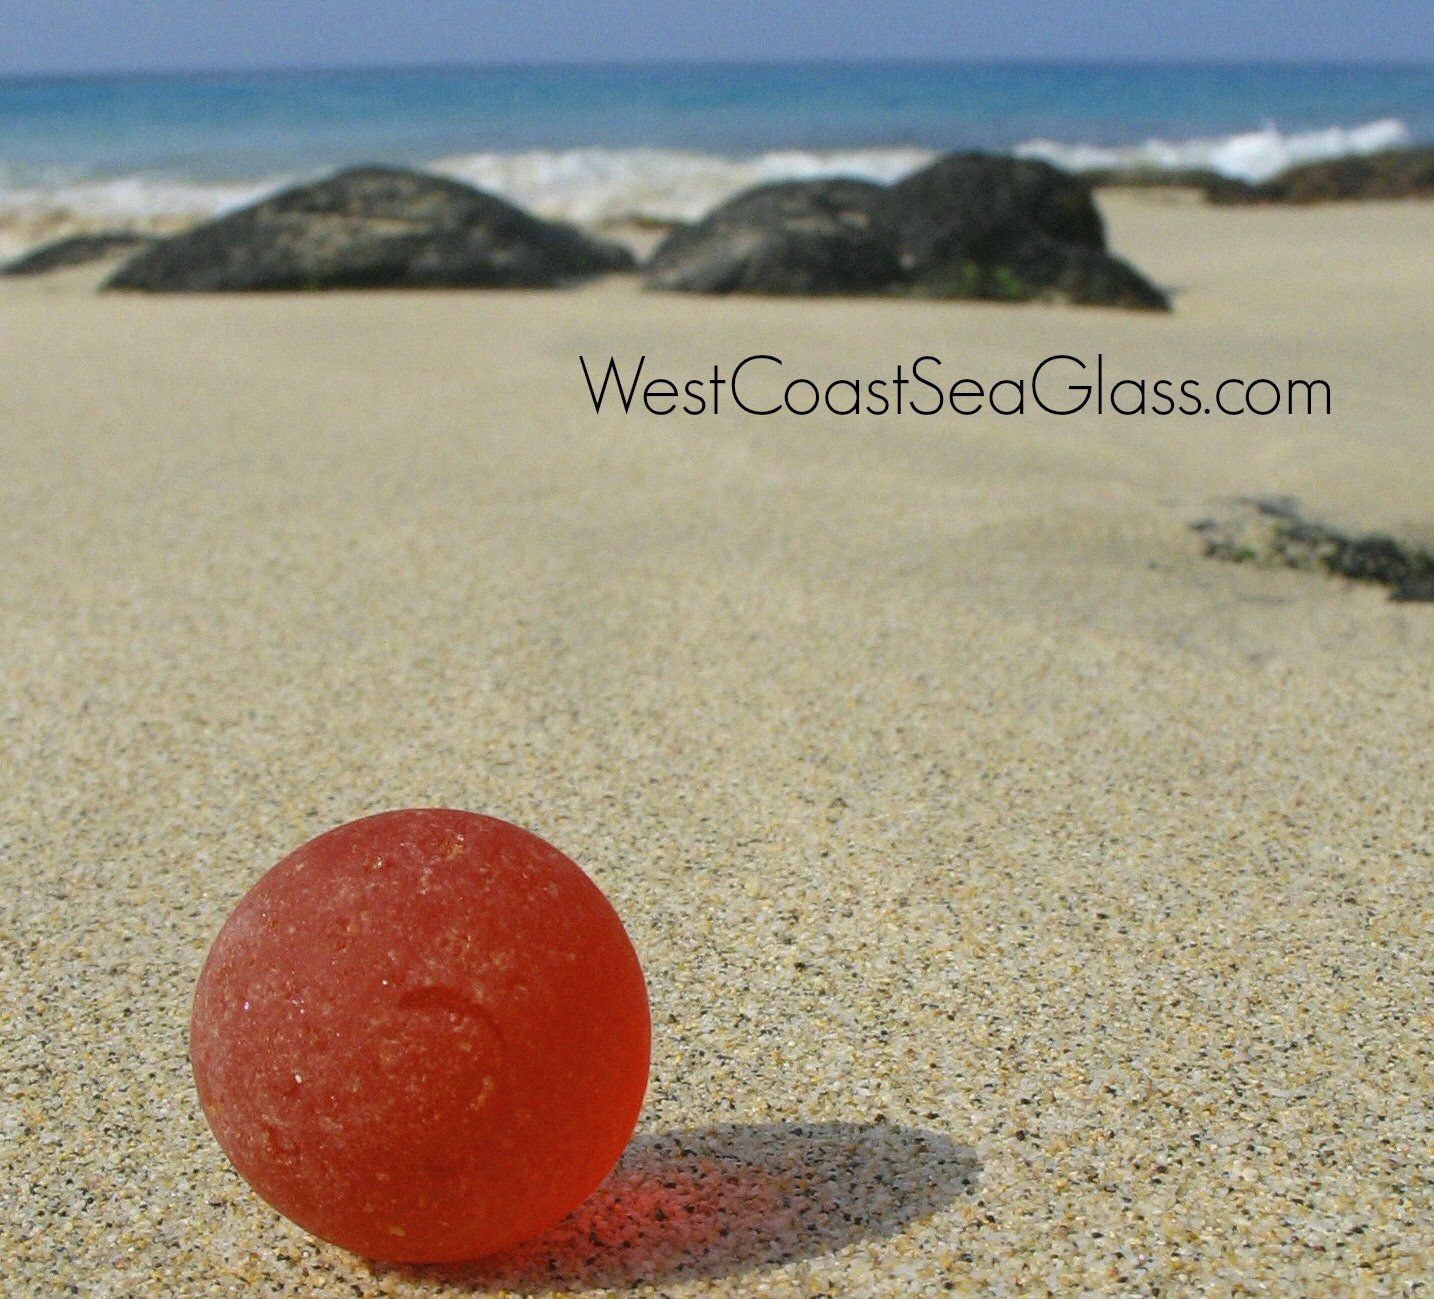 Perfectly round, natural sea glass marble on the beach